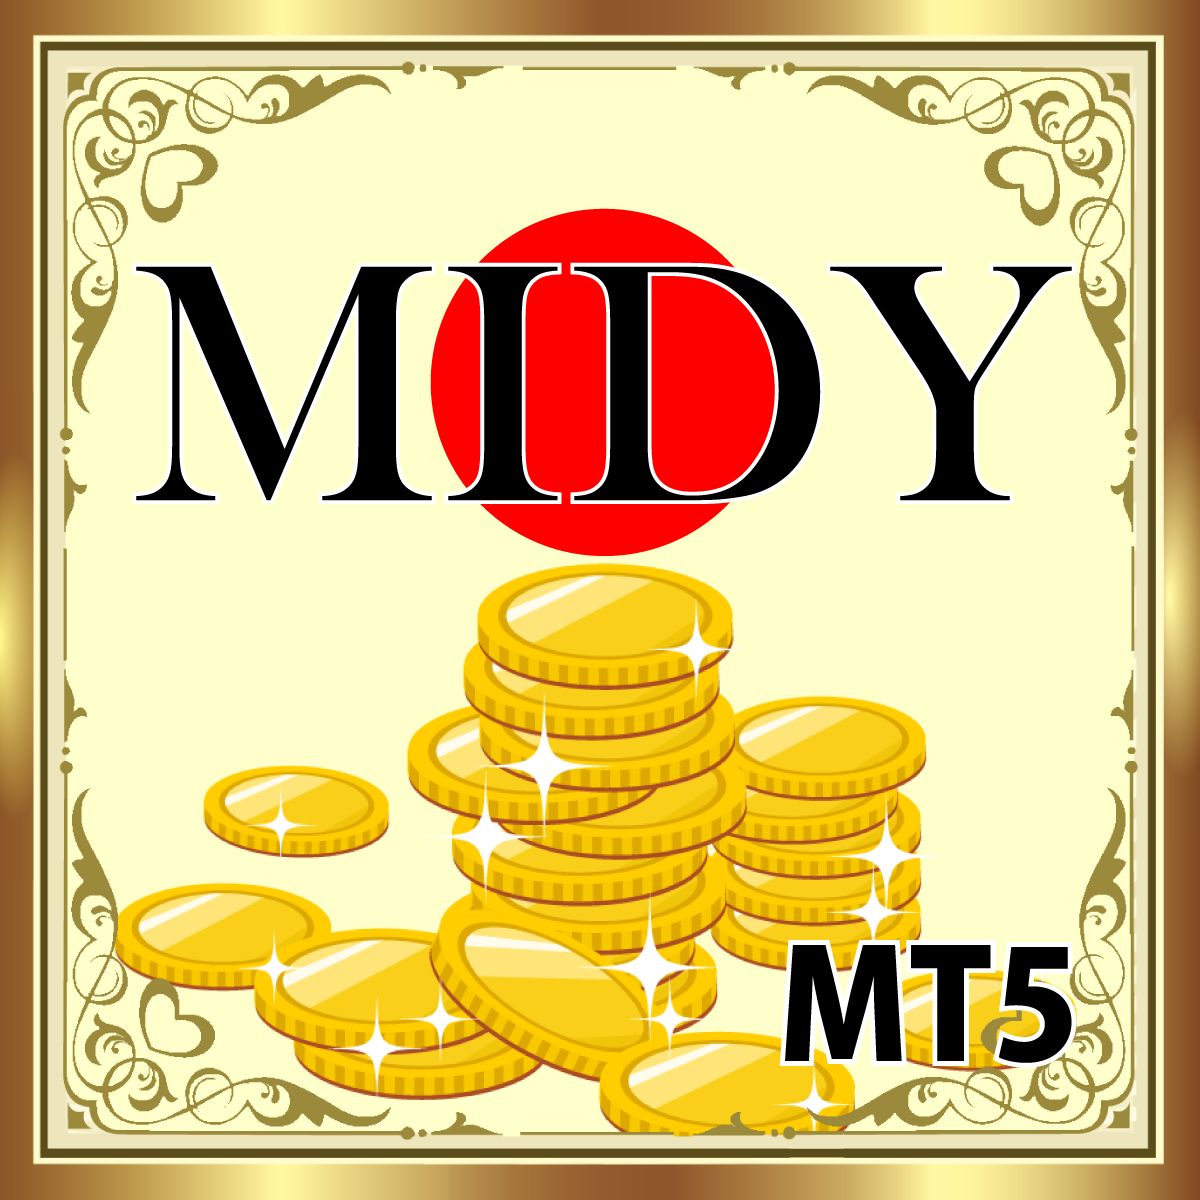 MIDY（ミディ） MT5 Tự động giao dịch